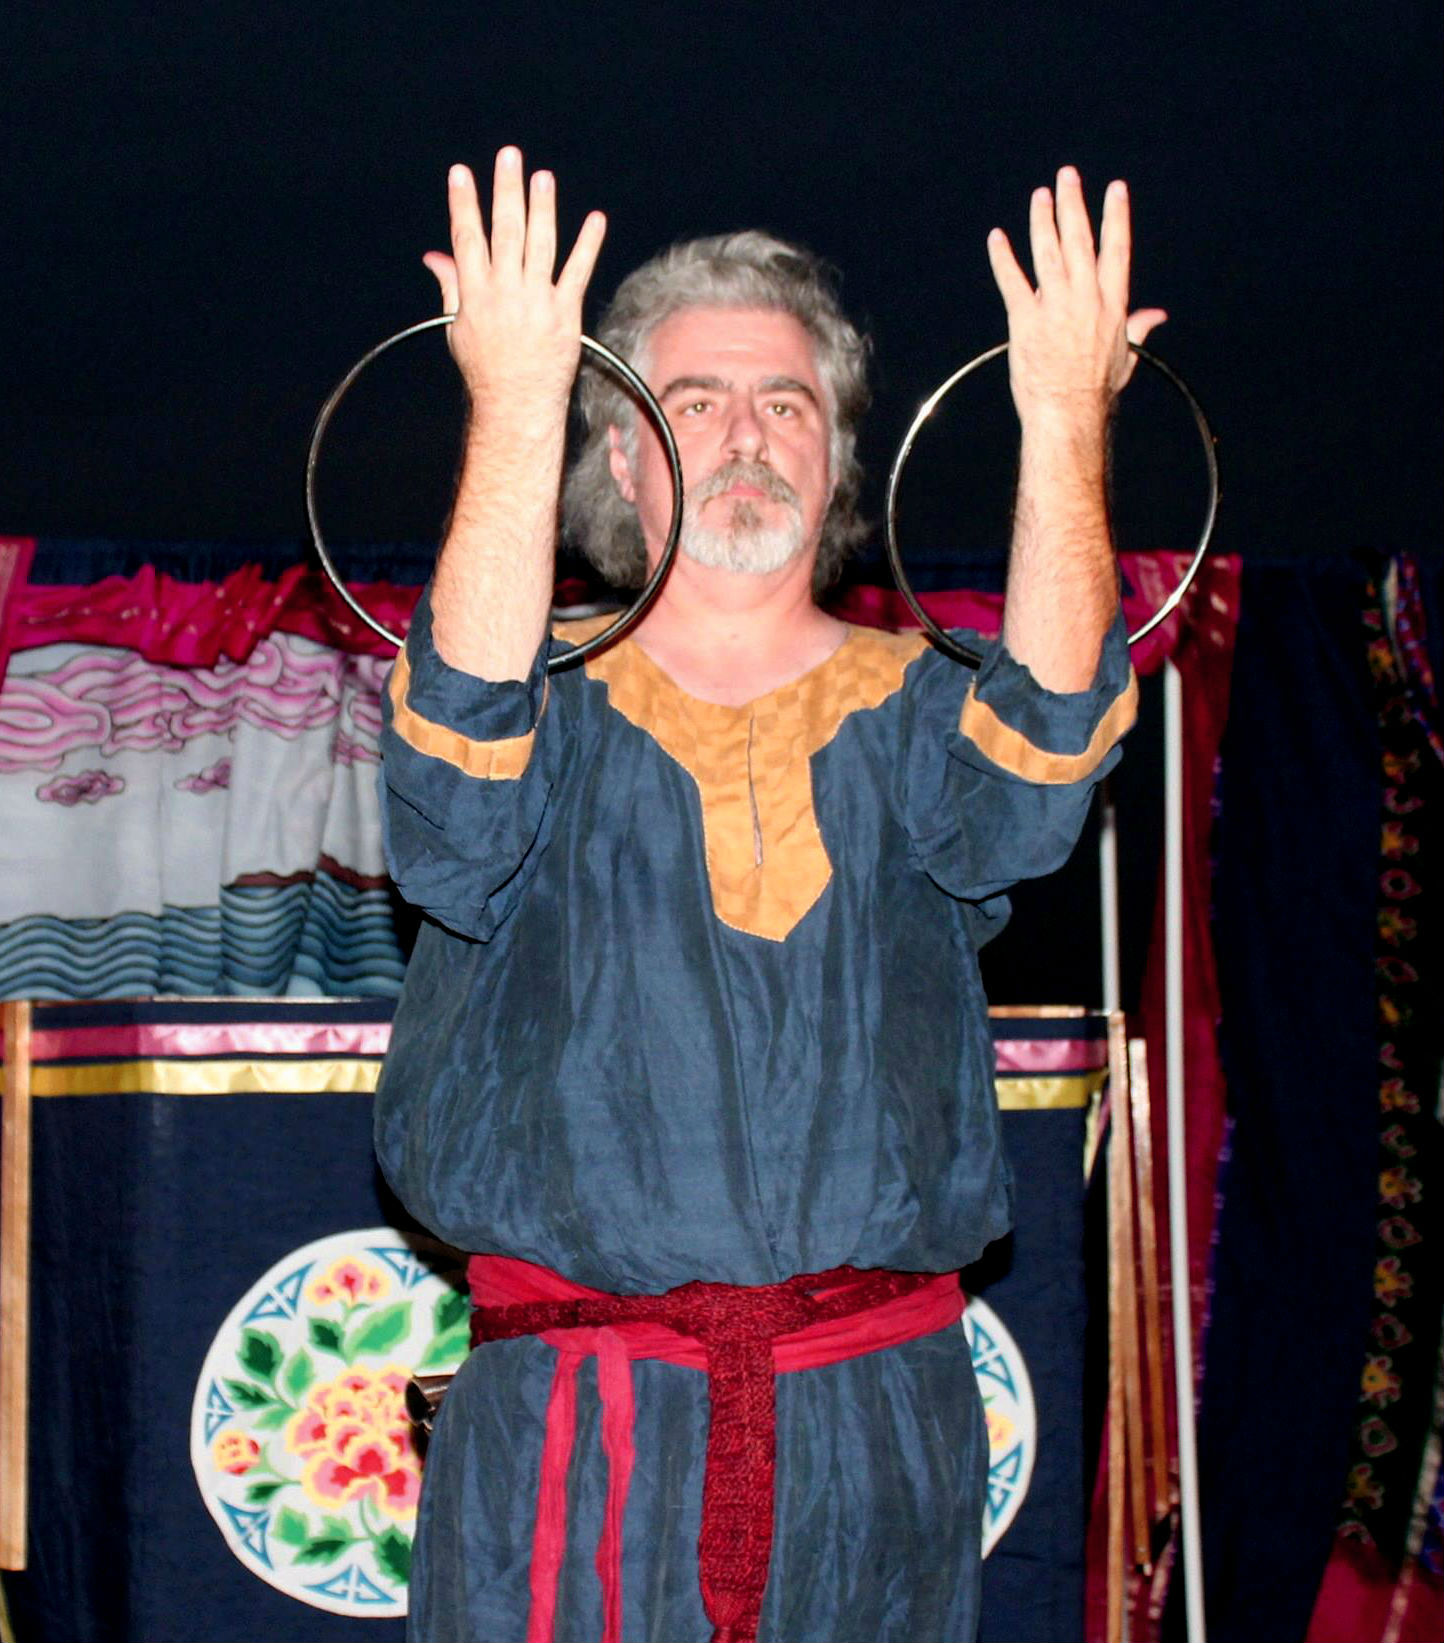 Santiago performing the Linking Rings